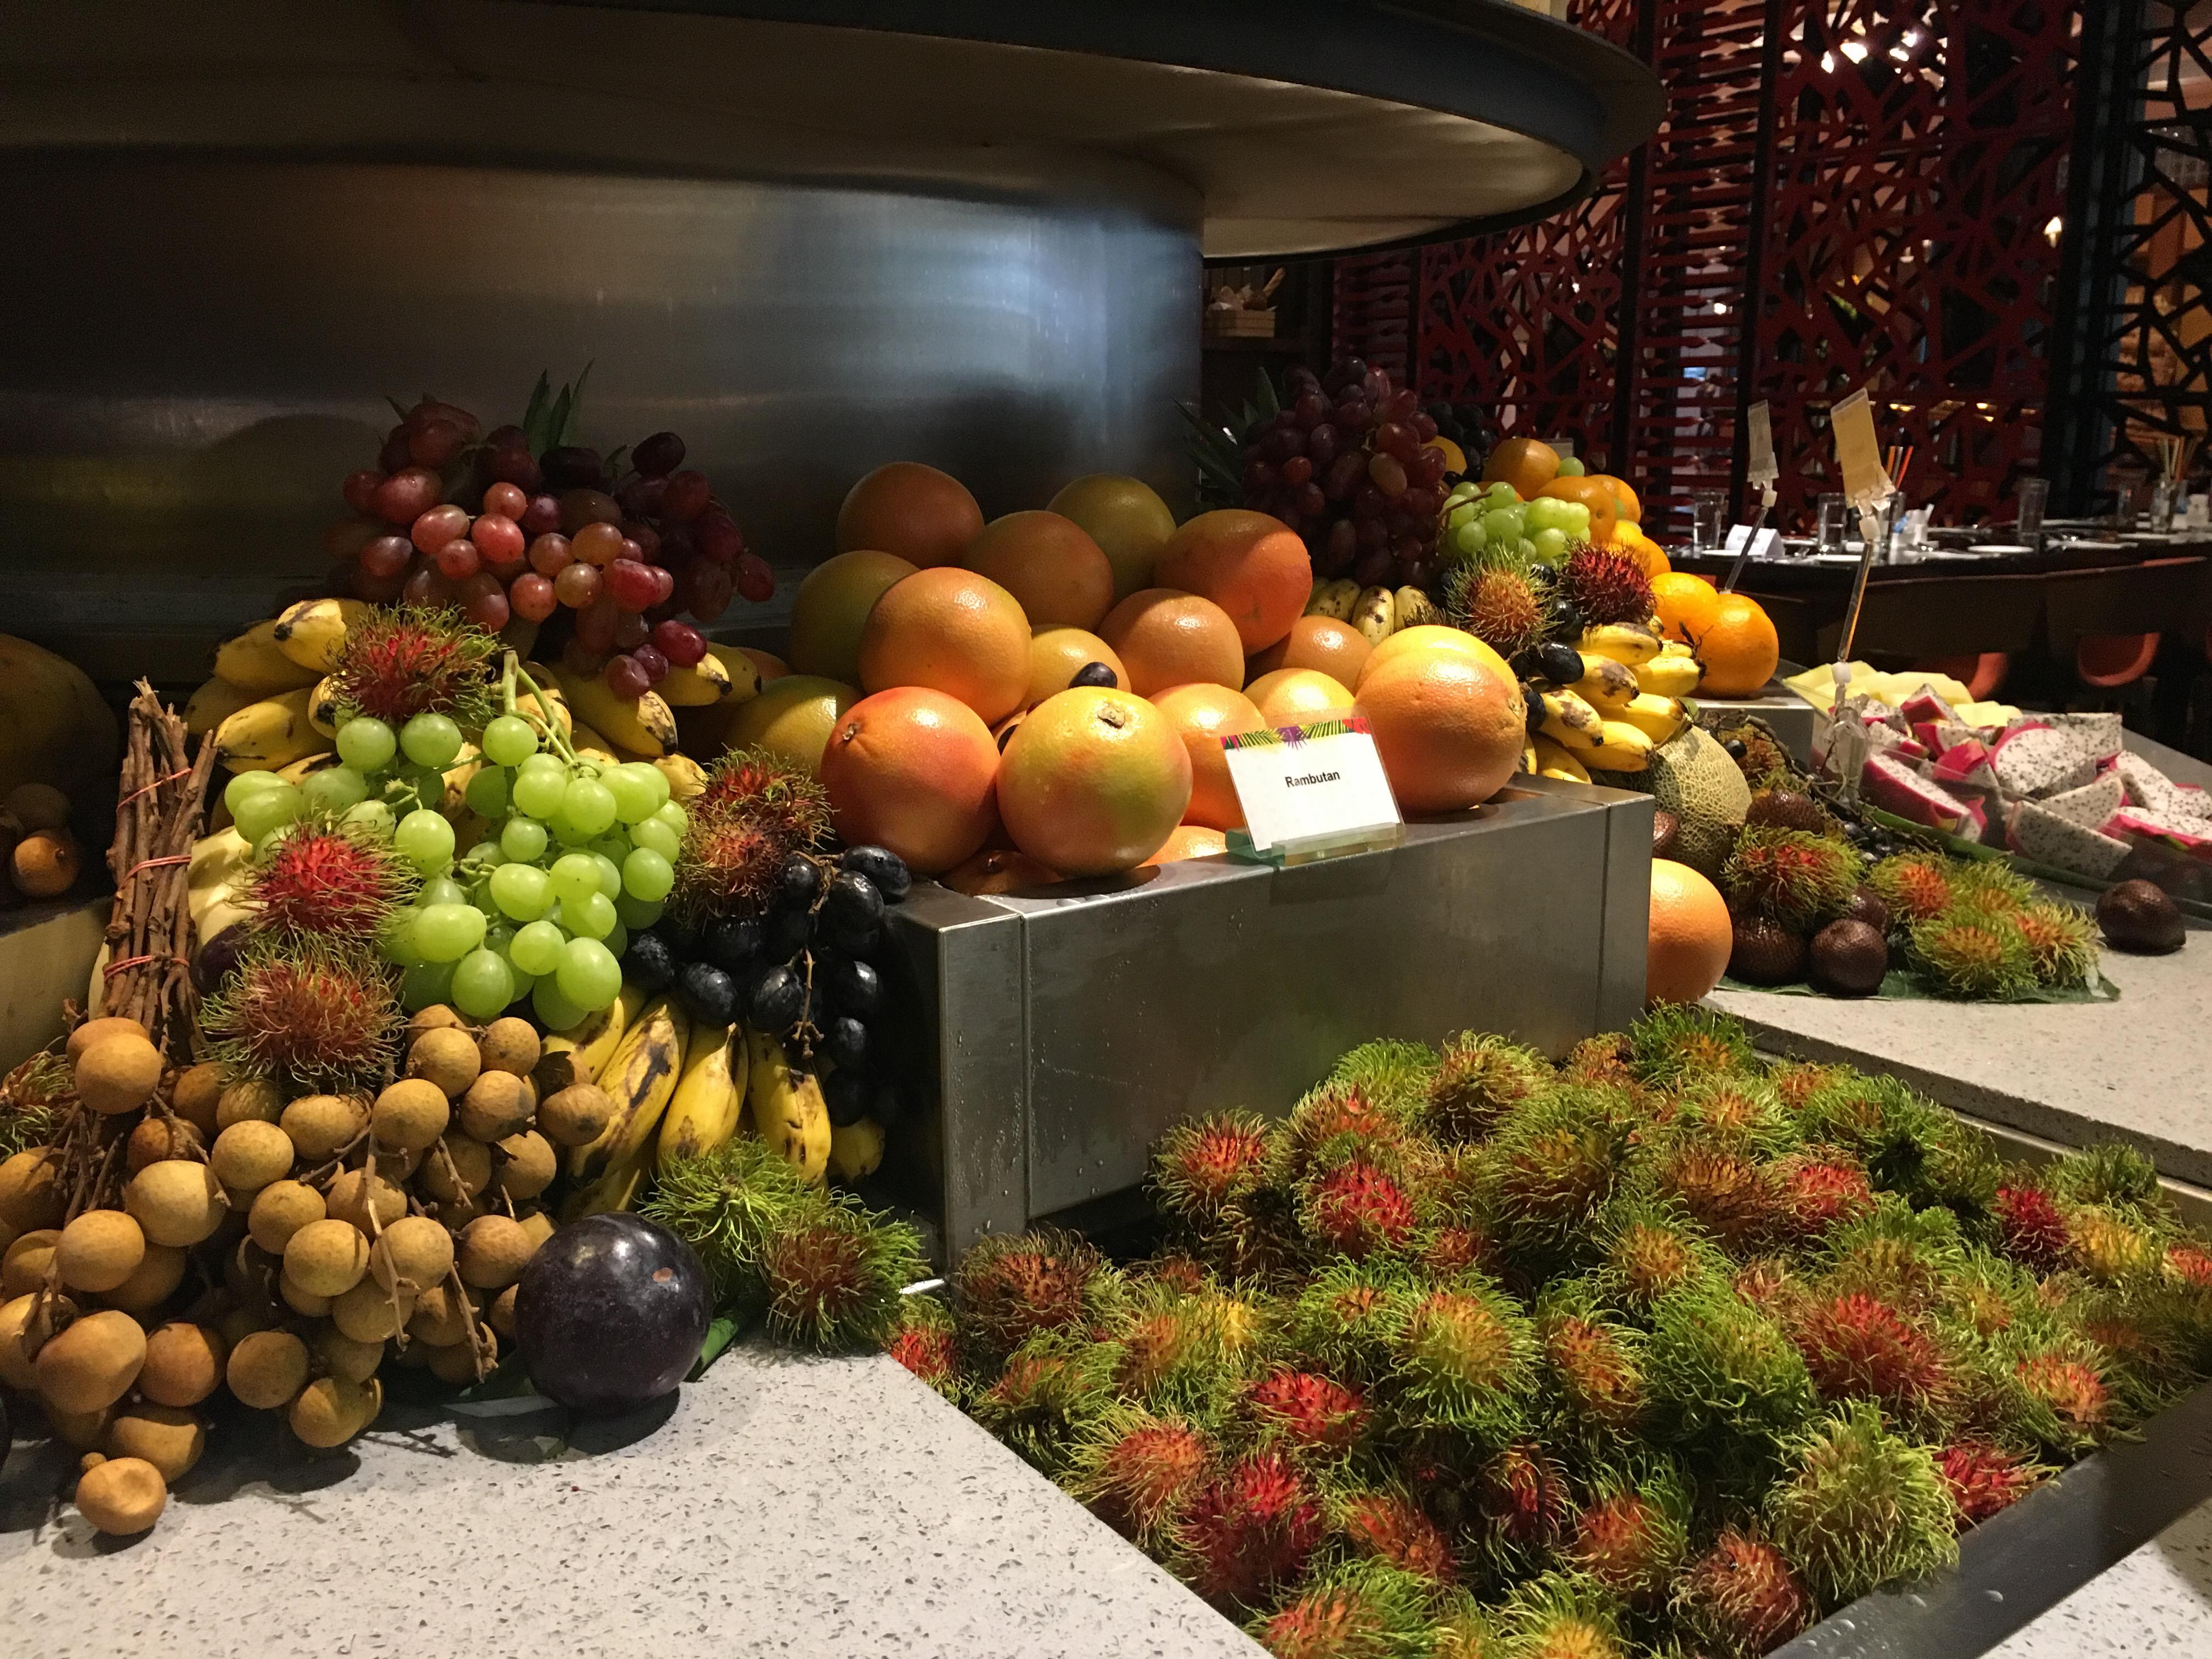 Just a quarter of the selection of fruits at the #JemputMakan dinner buffet 